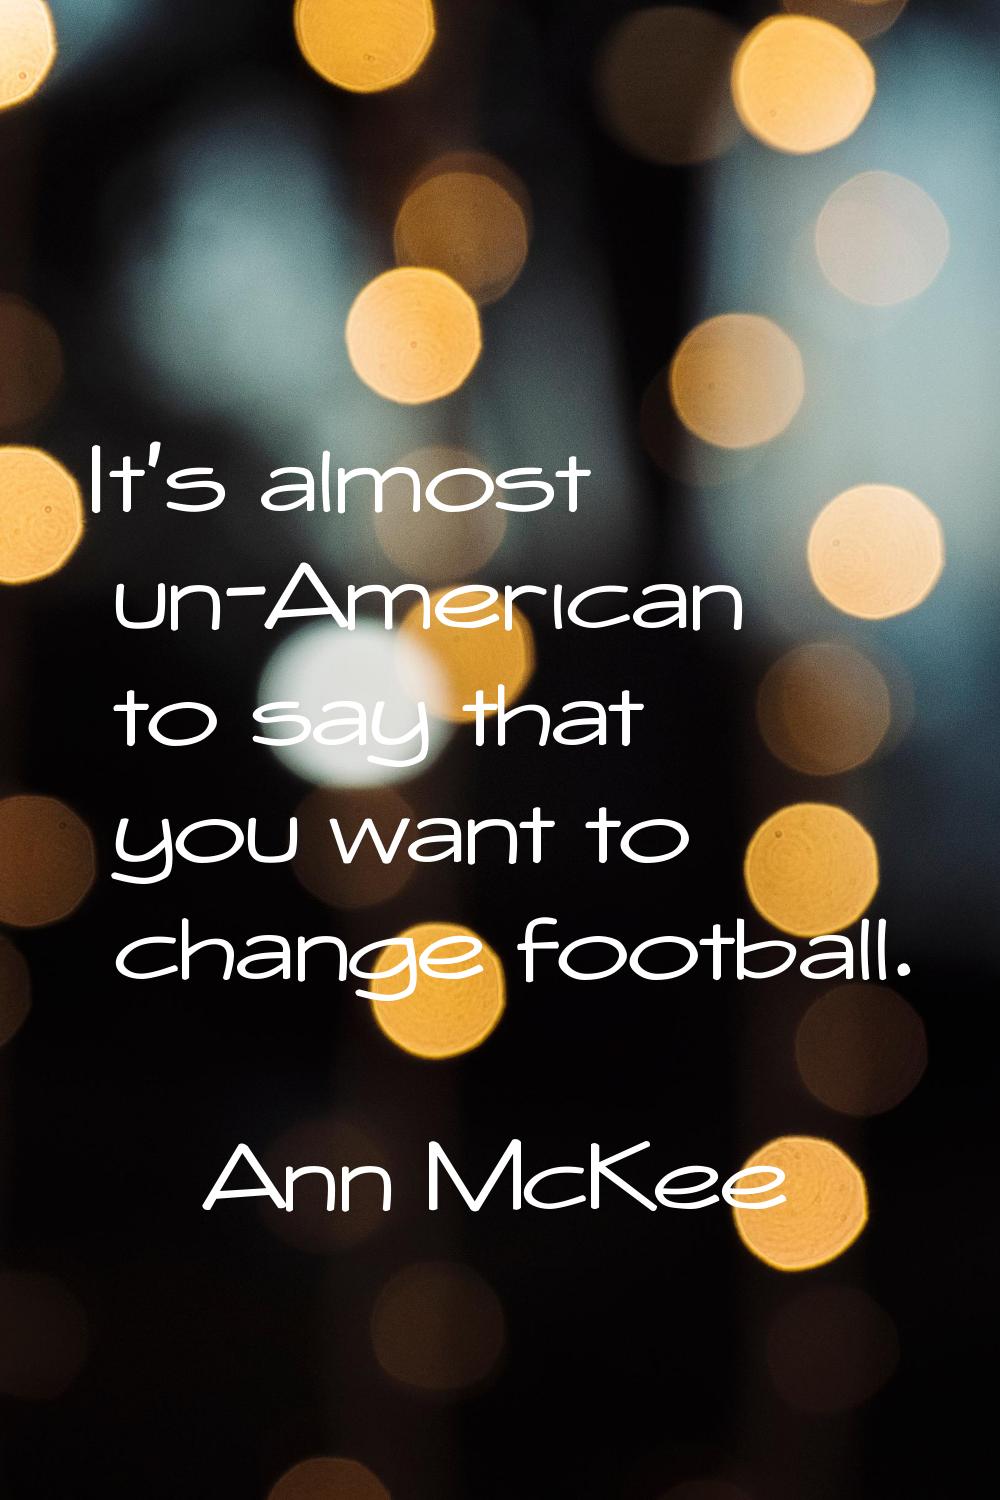 It's almost un-American to say that you want to change football.